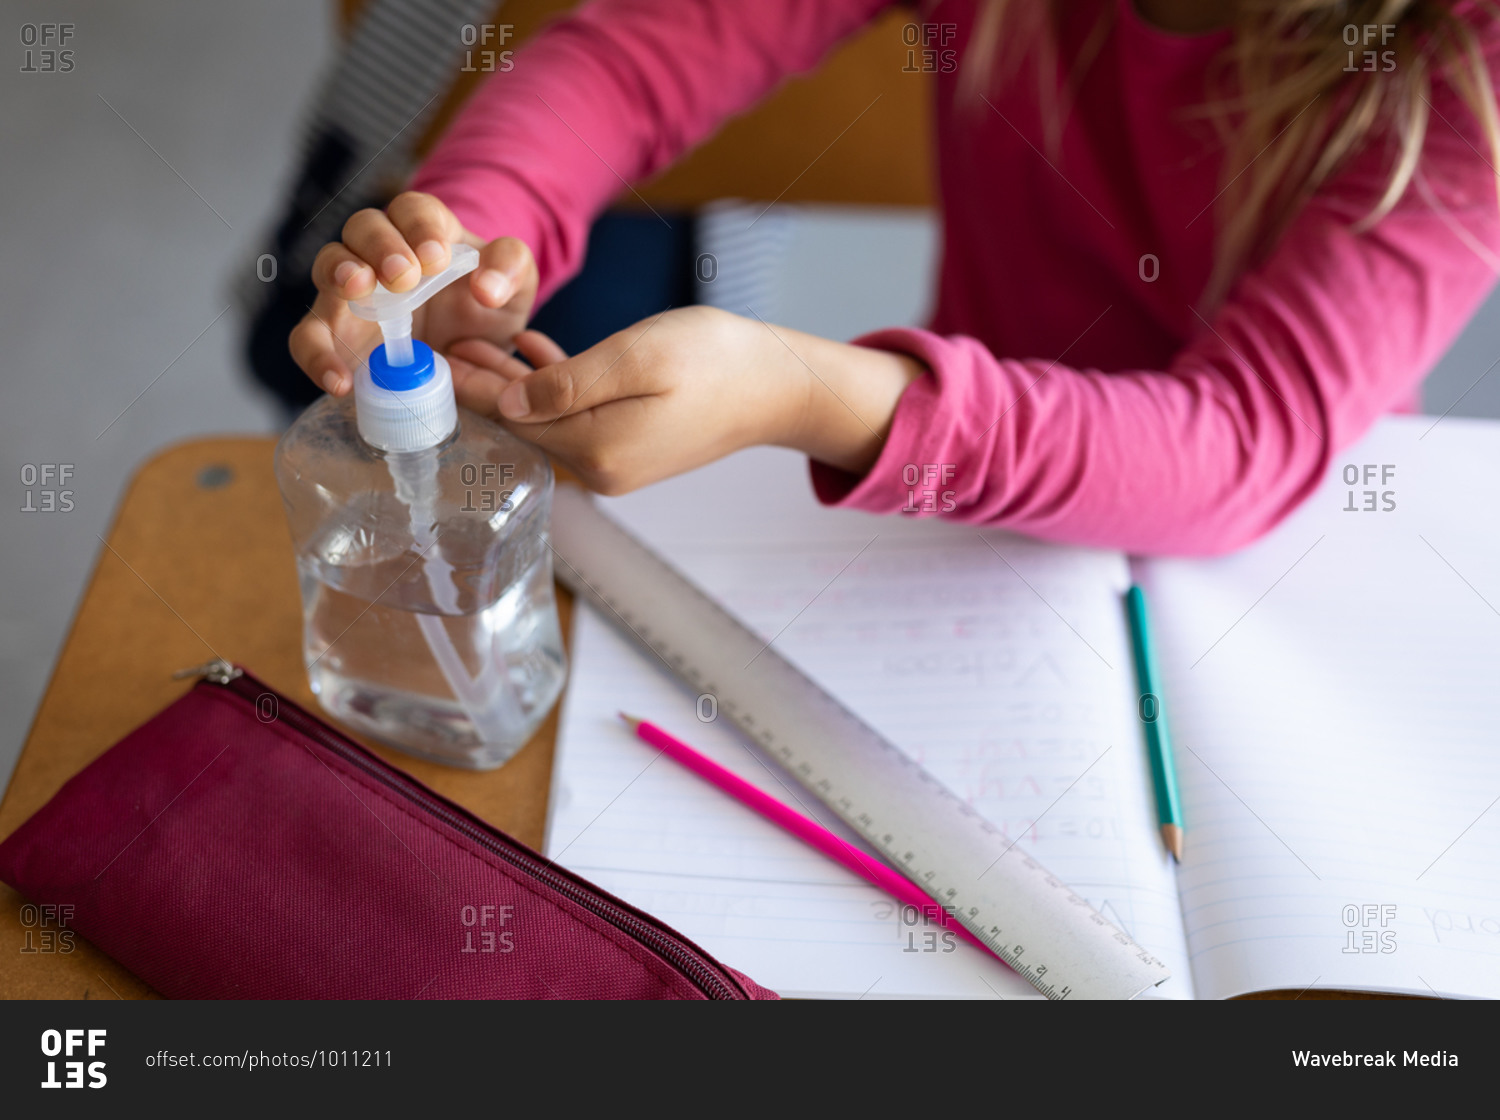 Mid section of a Caucasian girl sitting at desk and sanitizing her hands. Primary education social distancing health safety during Covid19 Coronavirus pandemic.